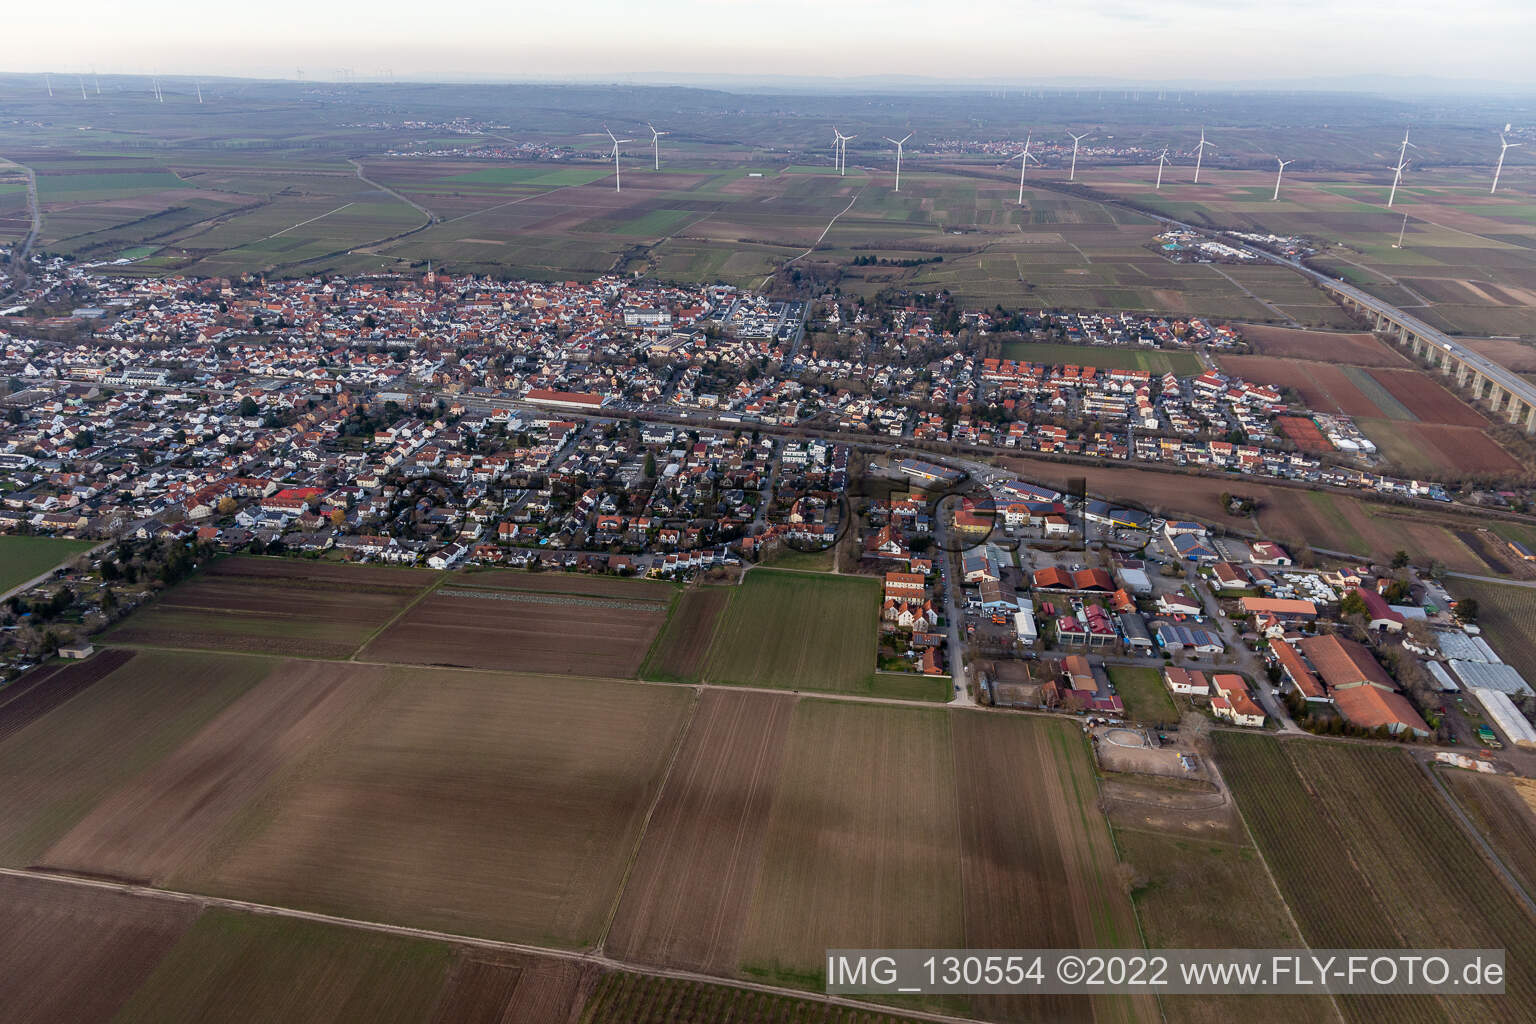 District Pfeddersheim in Worms in the state Rhineland-Palatinate, Germany seen from above